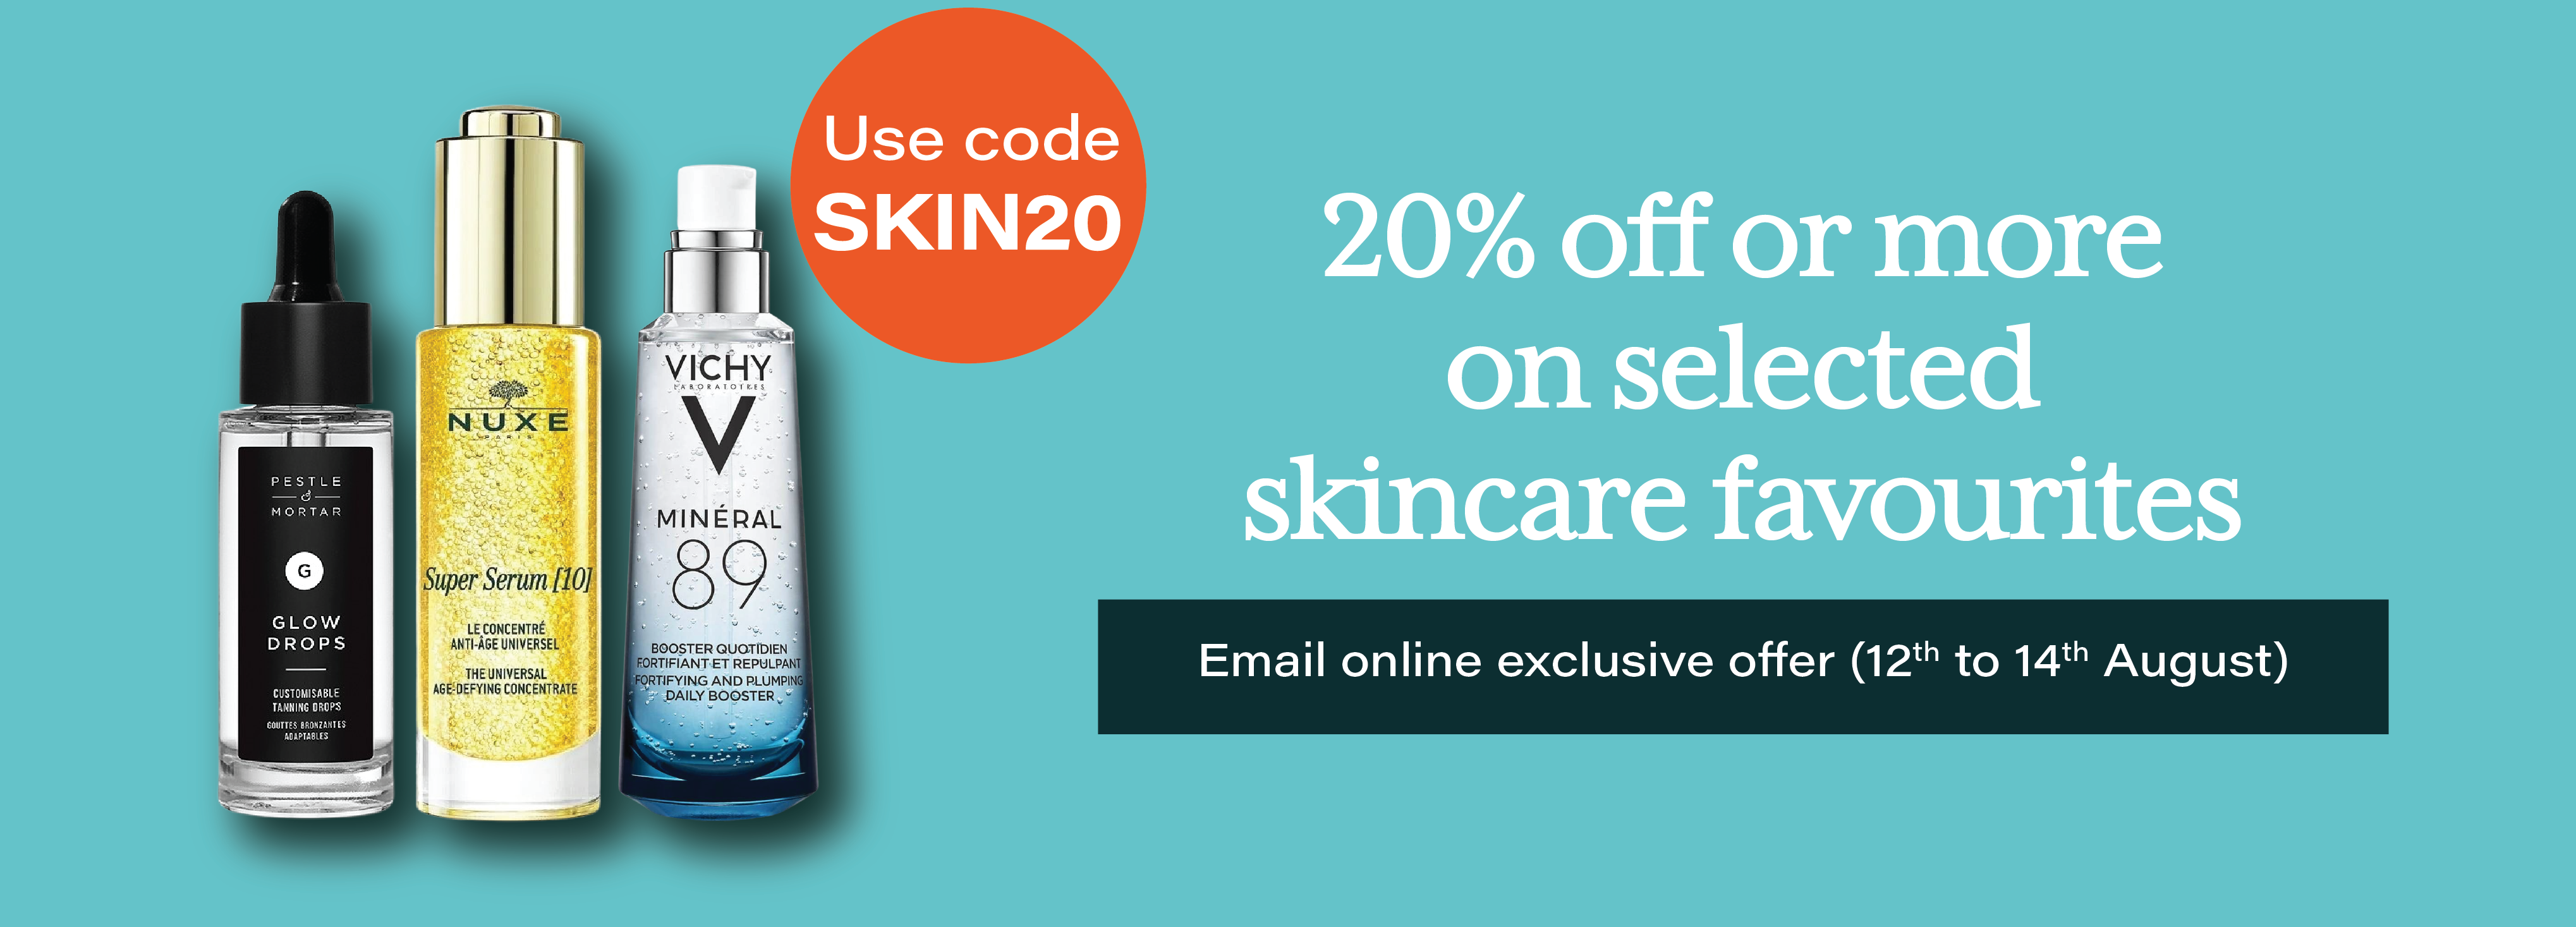 Save 20% on selected skincare - email exclusive